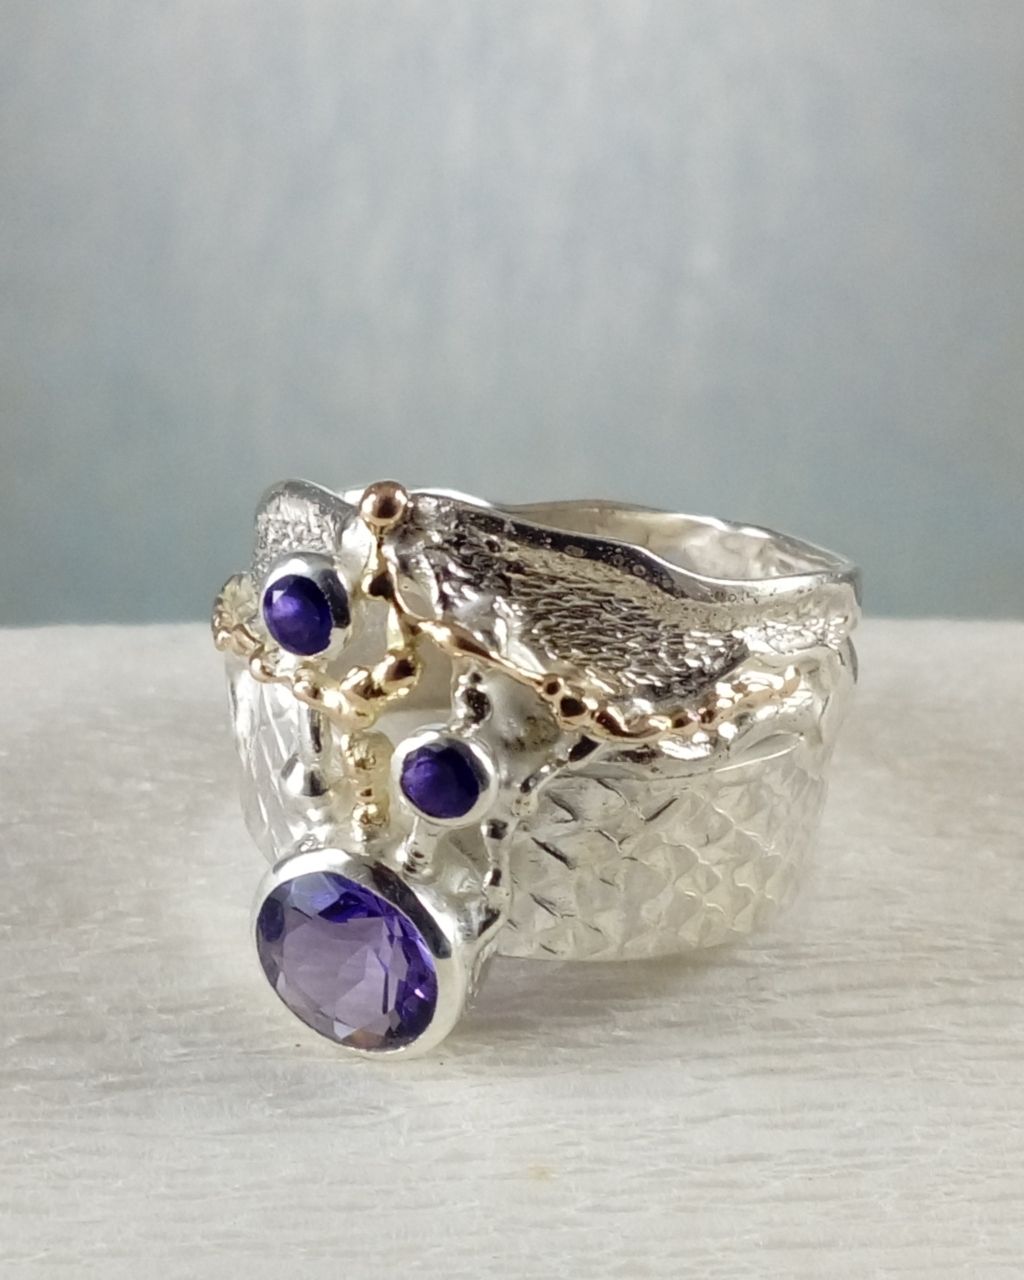 ,luxury goods and jewelry for women, rings from 14 karat gold and silver for women, handcrafted rings for women with amethyst, sterling silver and 14k gold ring, gregory pyra piro ring 6820